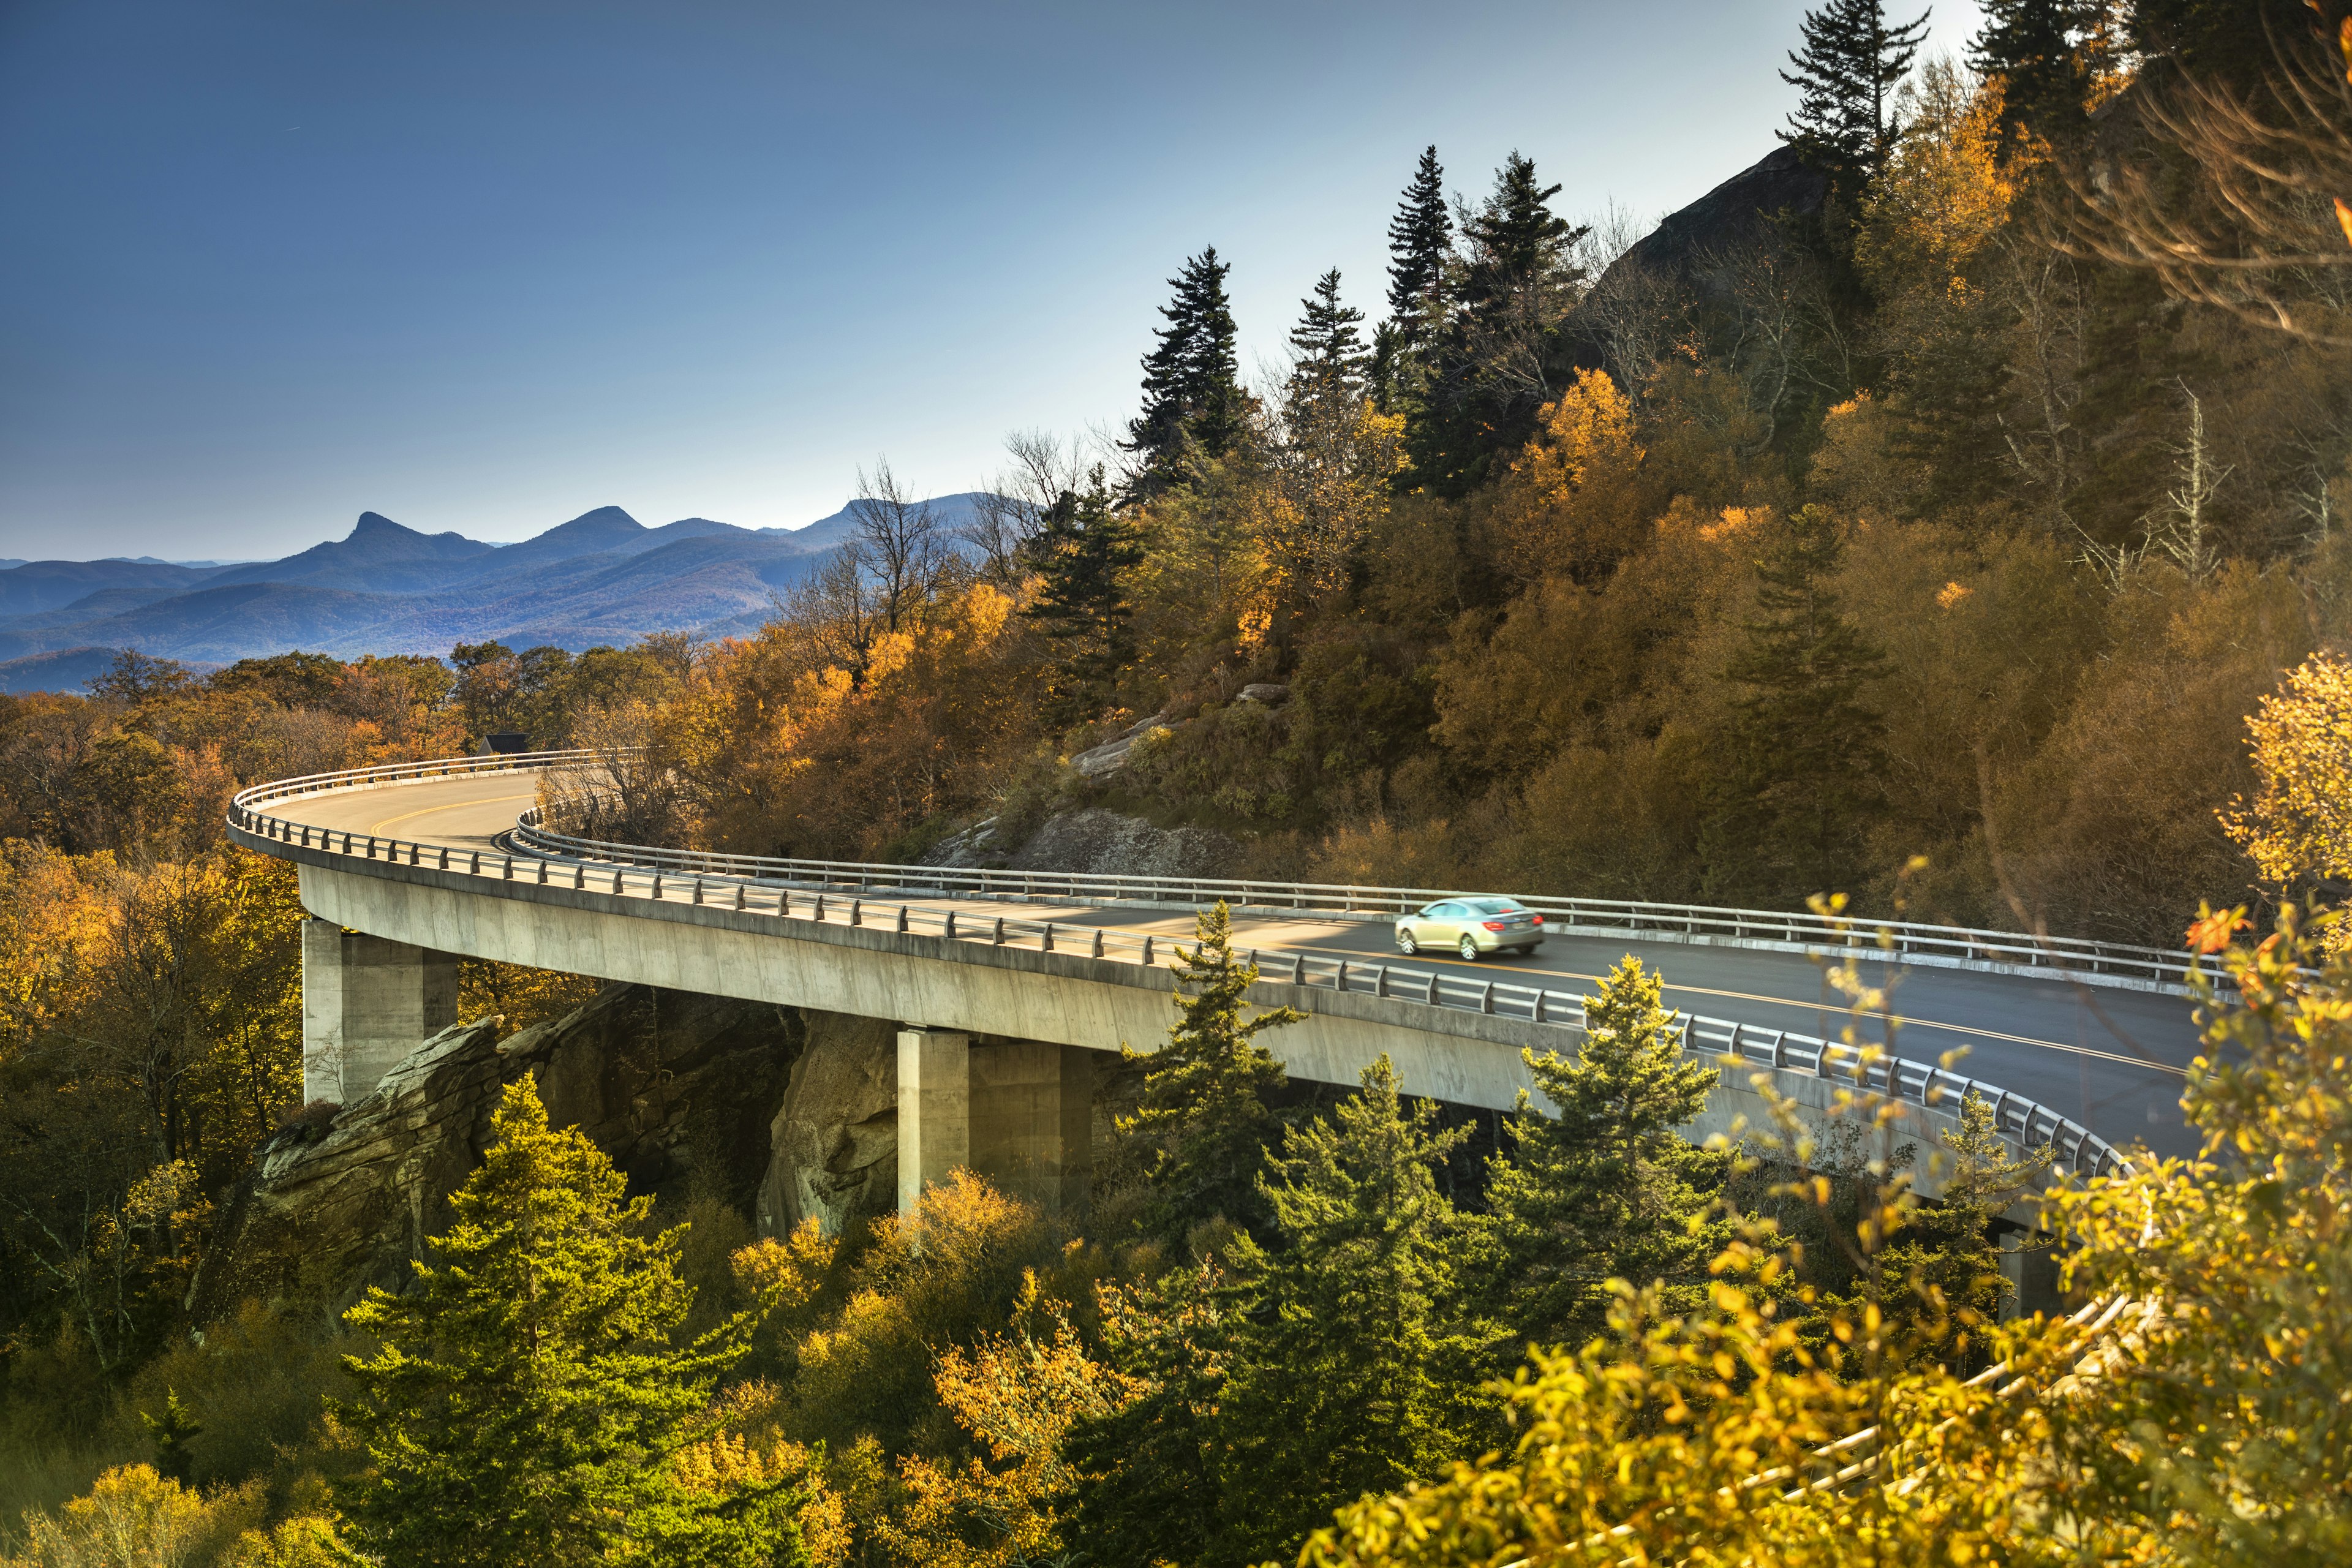 Linn Cove Viaduct Blue Ridge Parkway in autumn

Cars travel on the Linn Cove Viaduct highway road on the Grandfather Mountain along the Blue Ridge Parkway in autumn North Carolina